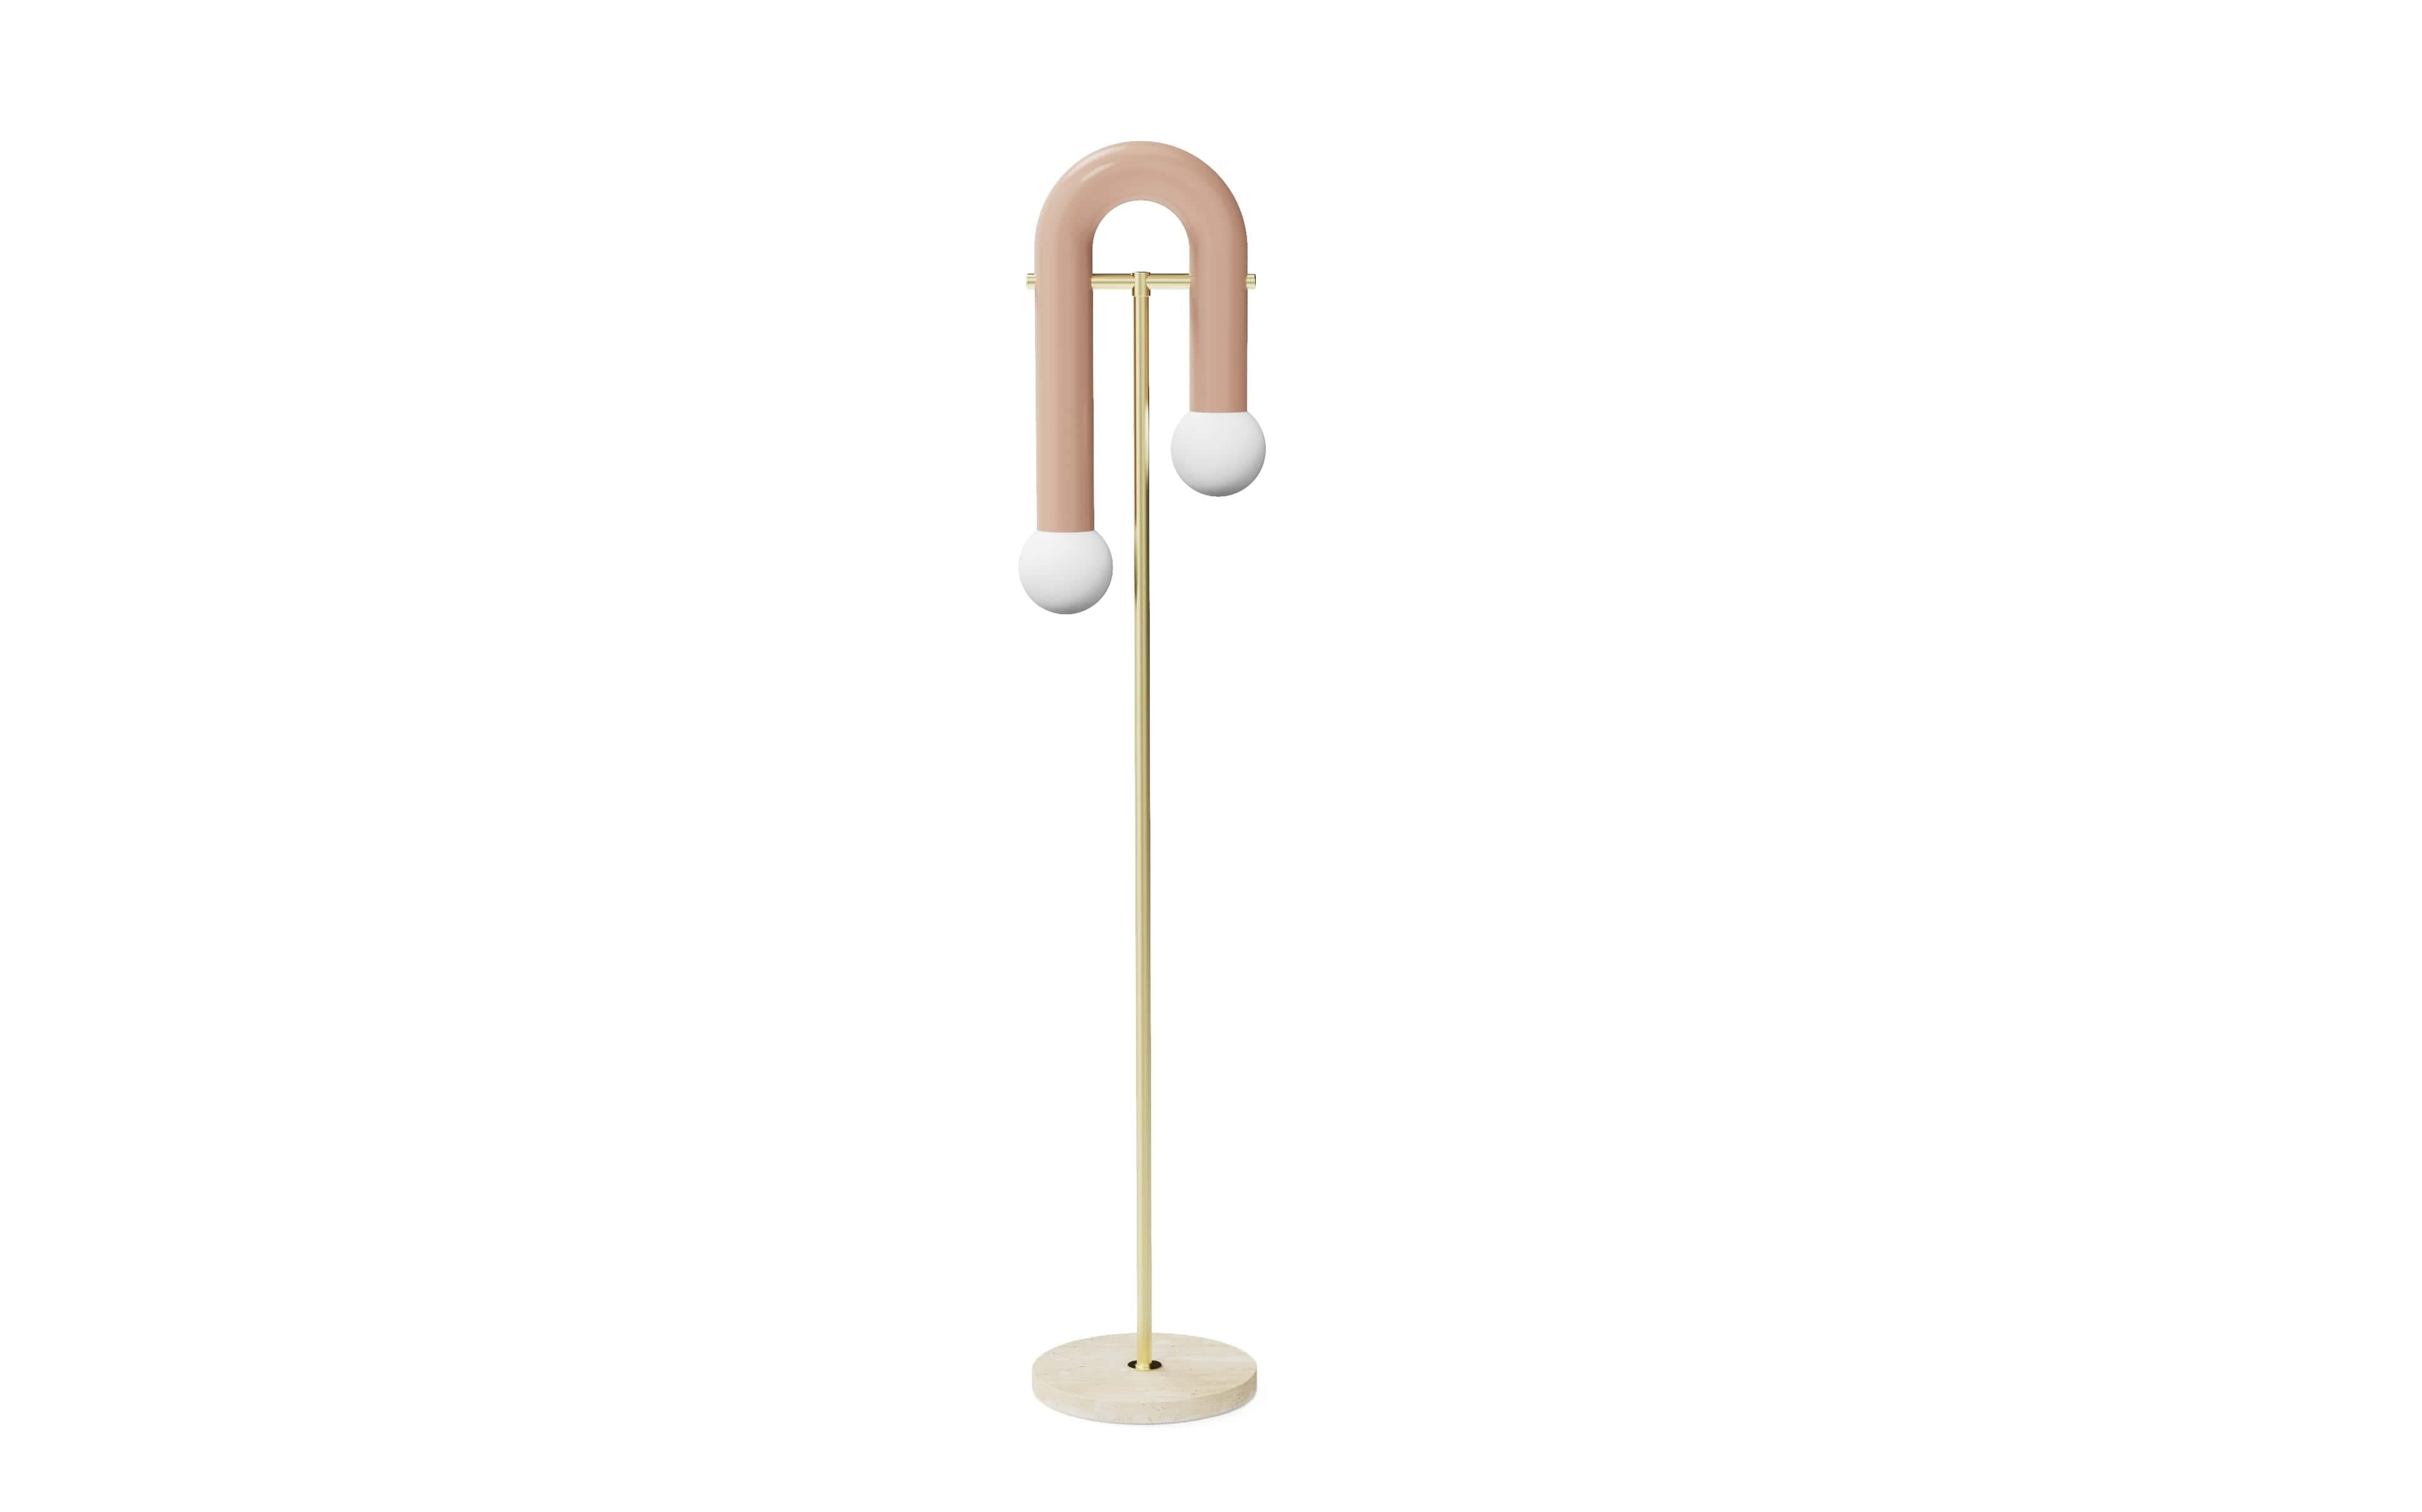 Pyppe floor lamp by Dooq
Dimensions: 162 x 32 x 32 cm
Materials: Lacquered metal, brass, nickel/copper, travertine

All our lamps can be wired according to each country. If sold to the USA it will be wired for the USA for instance.

Dooq is a